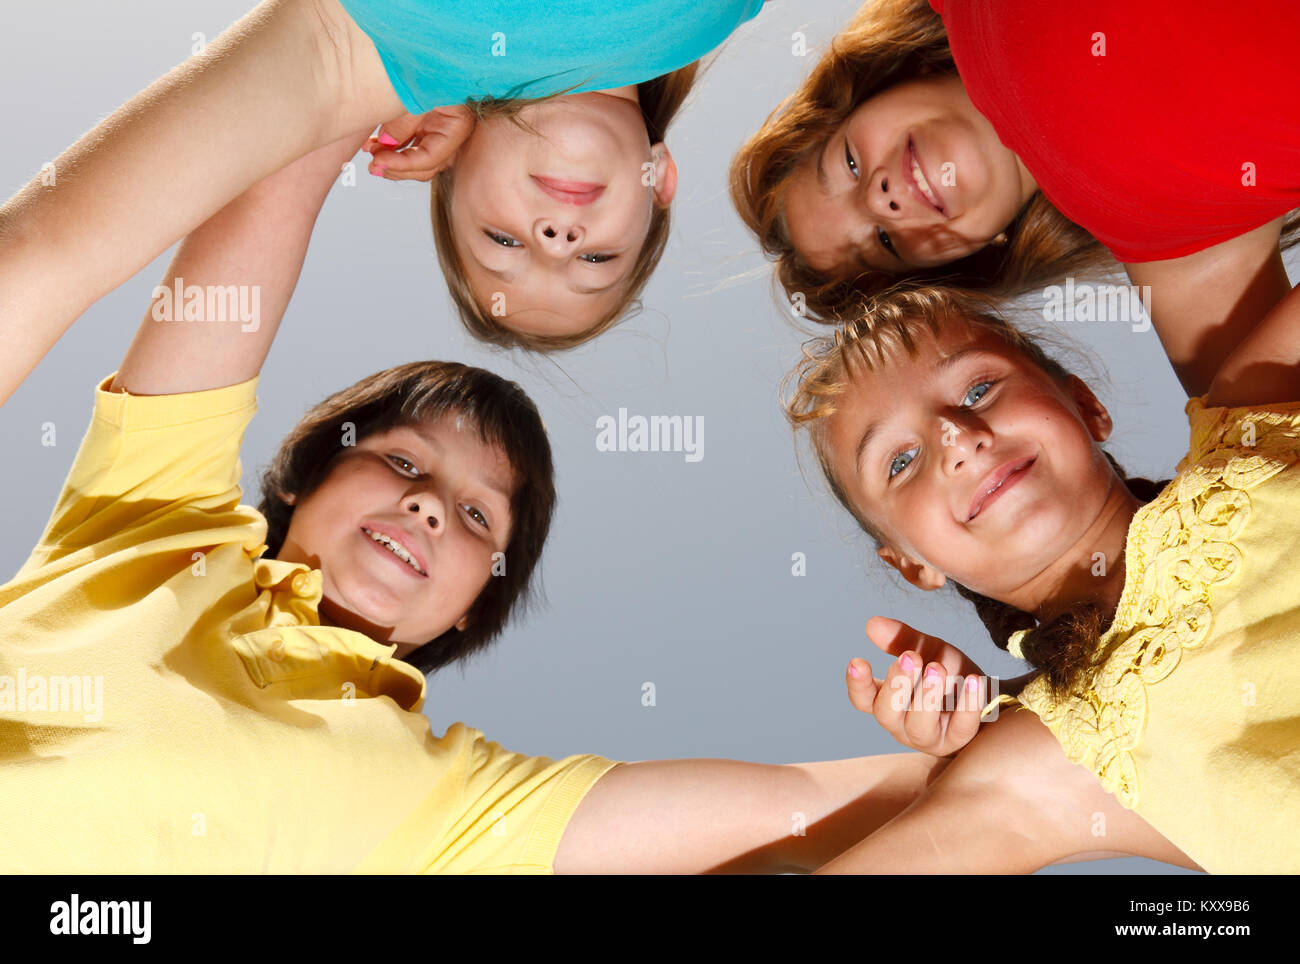 Group of four happy children showing unity Stock Photo